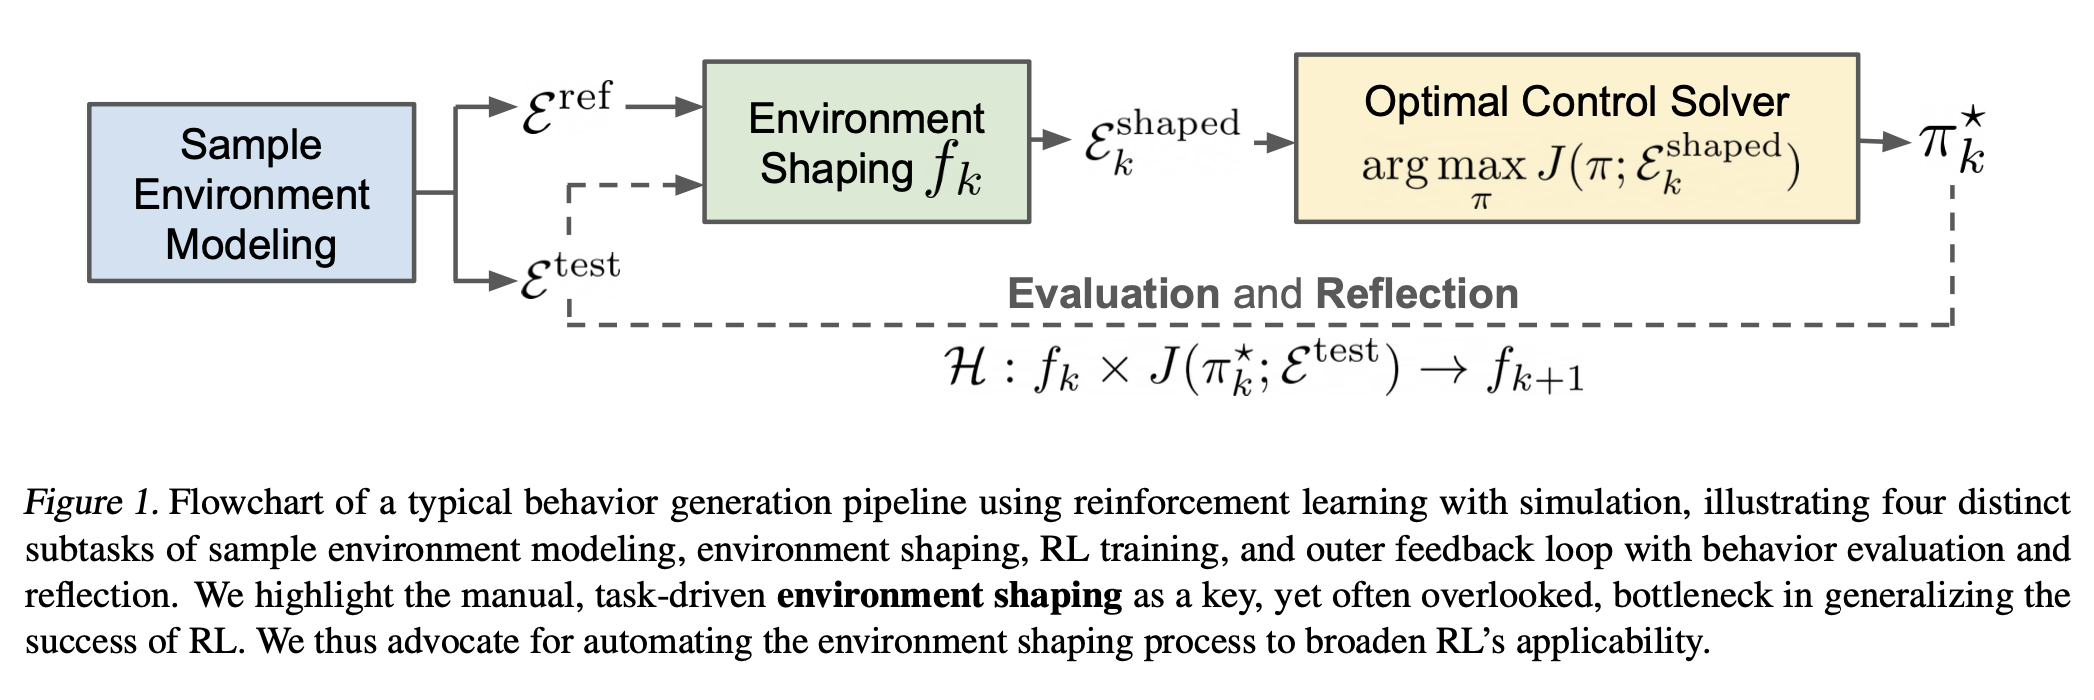 Environment Shaping Definition